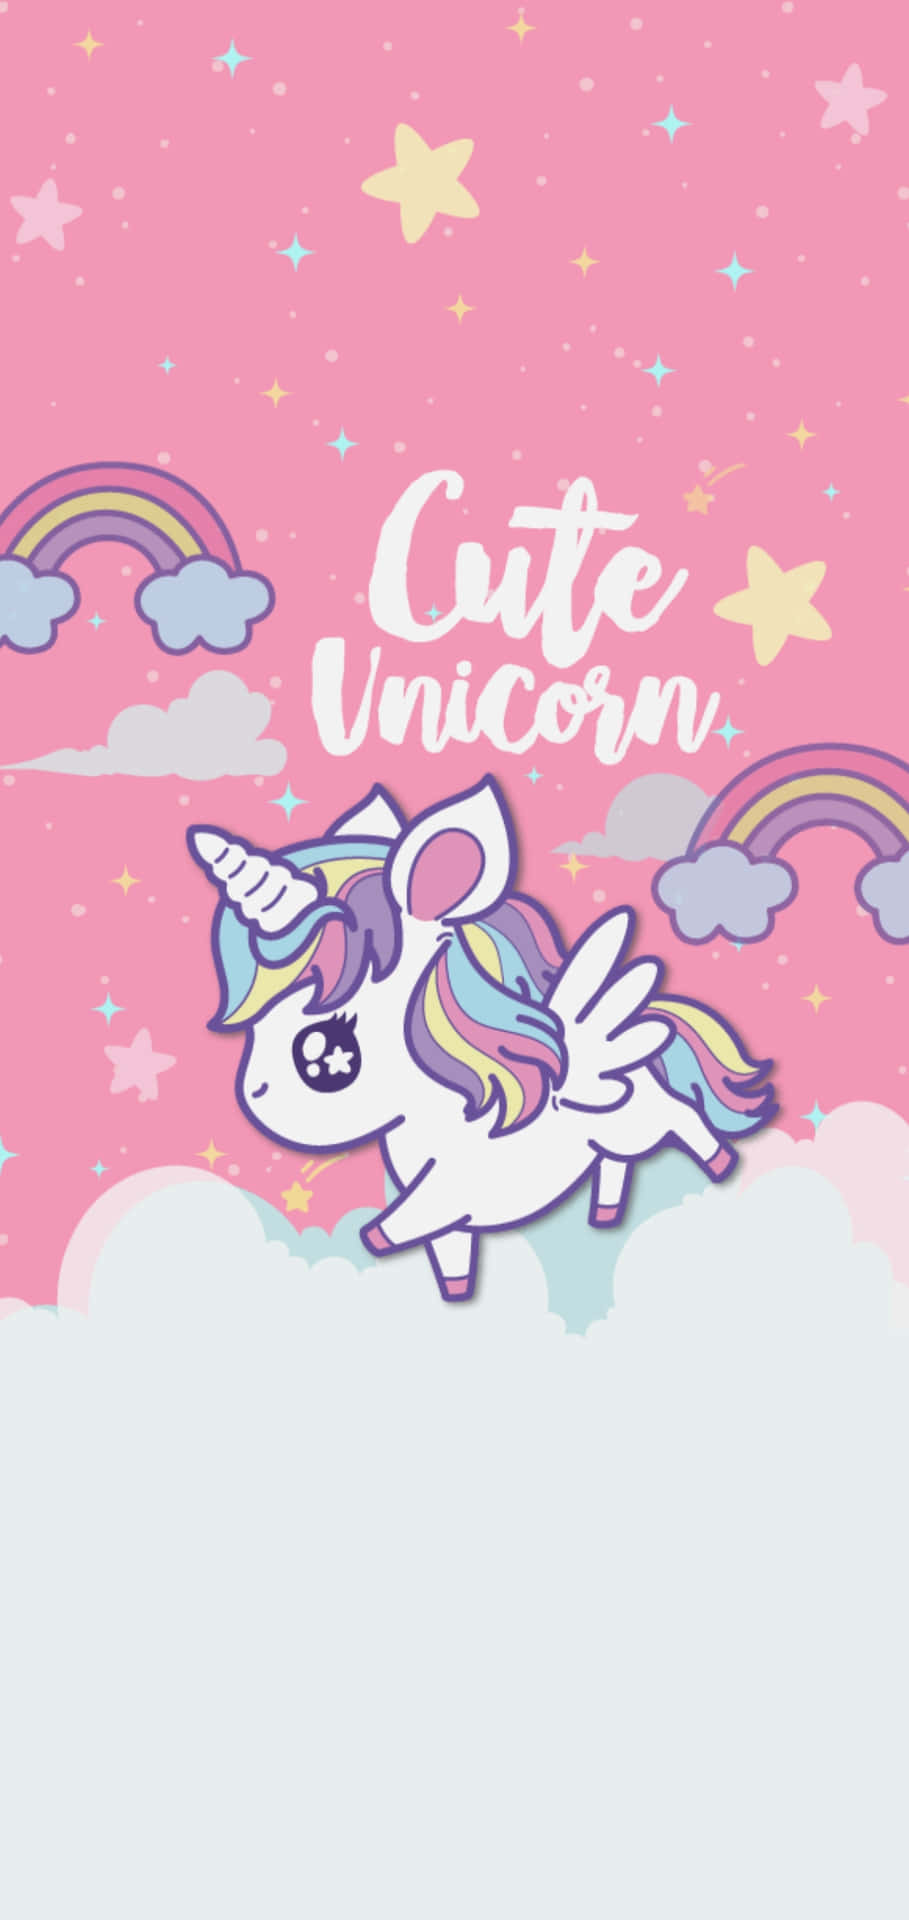 Colorful Small Unicorn On Pink Background